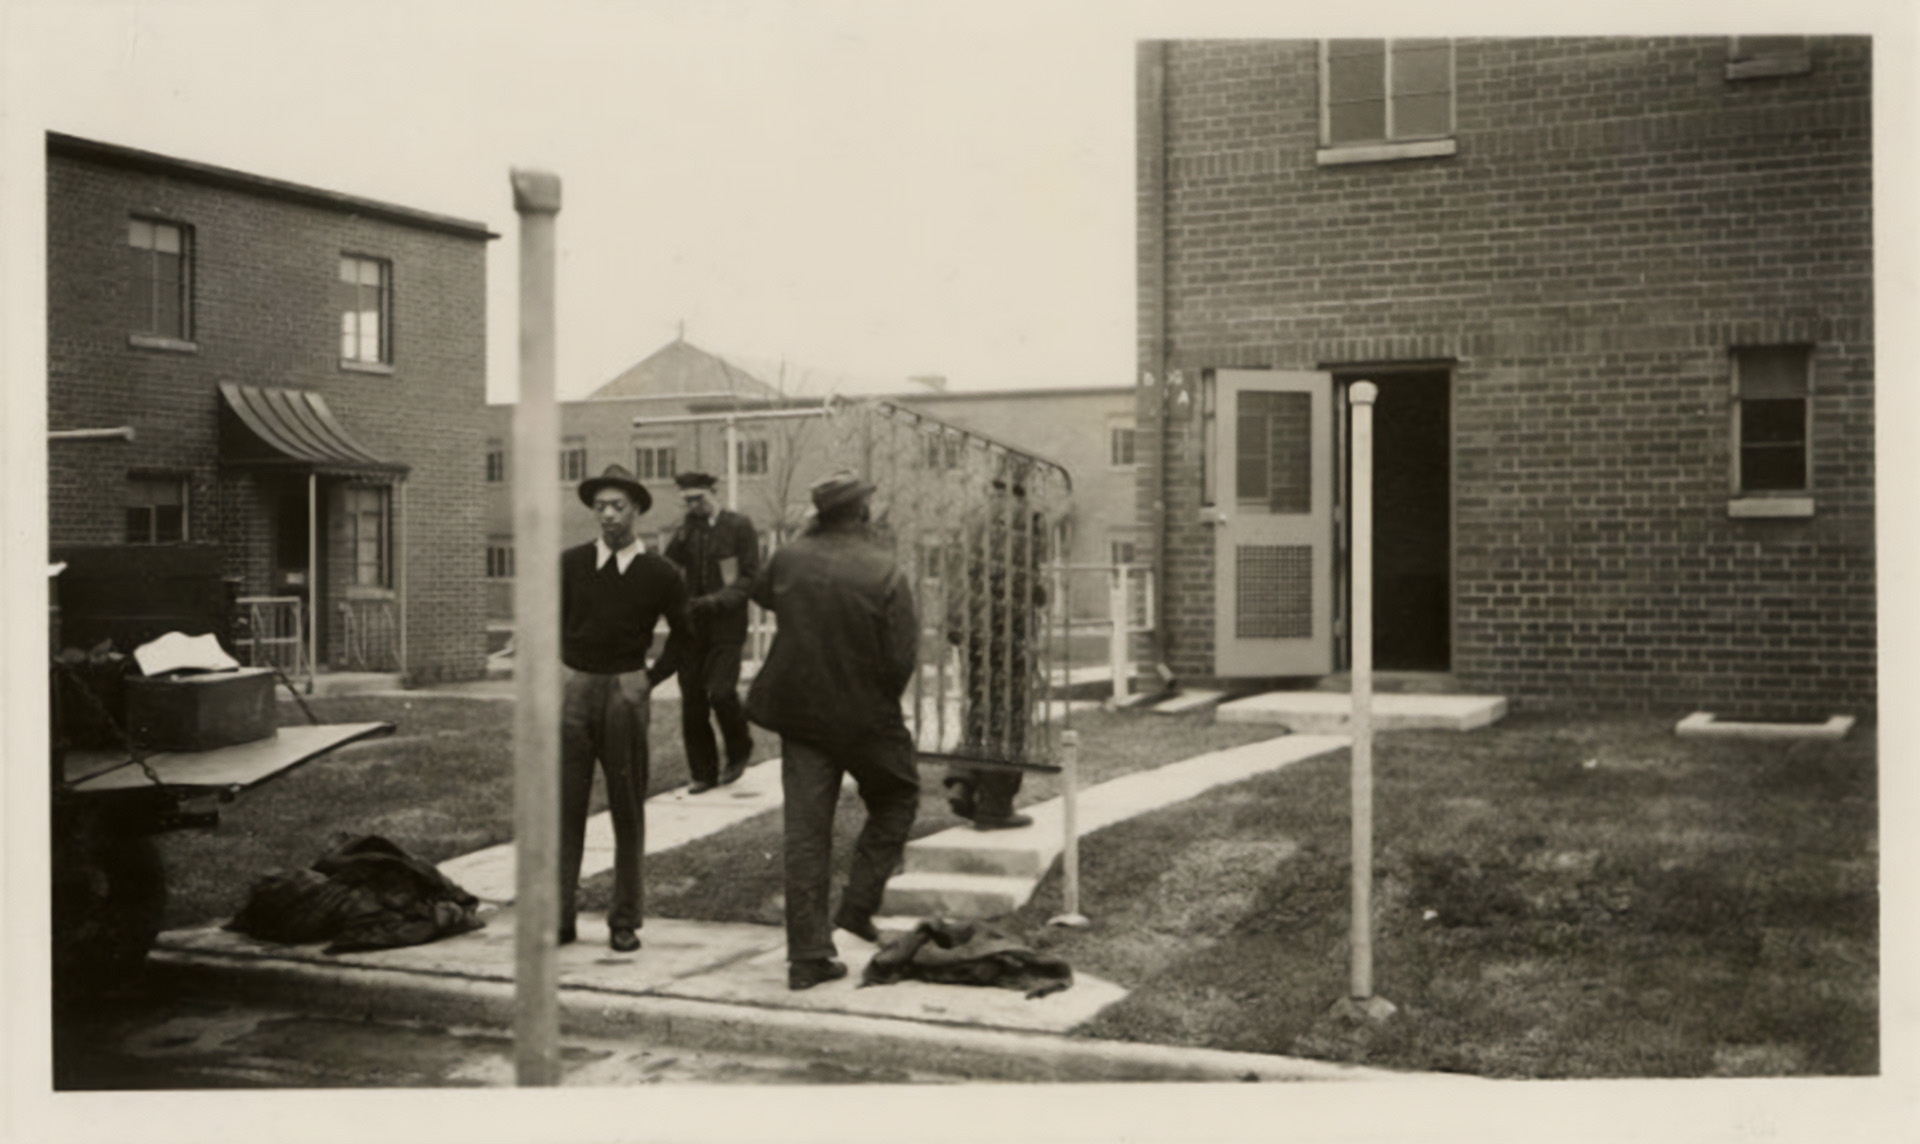 Dated May 13, 1940, photograph of two men carrying a bed frame into one of the units at Poindexter Village in Columbus, Ohio.